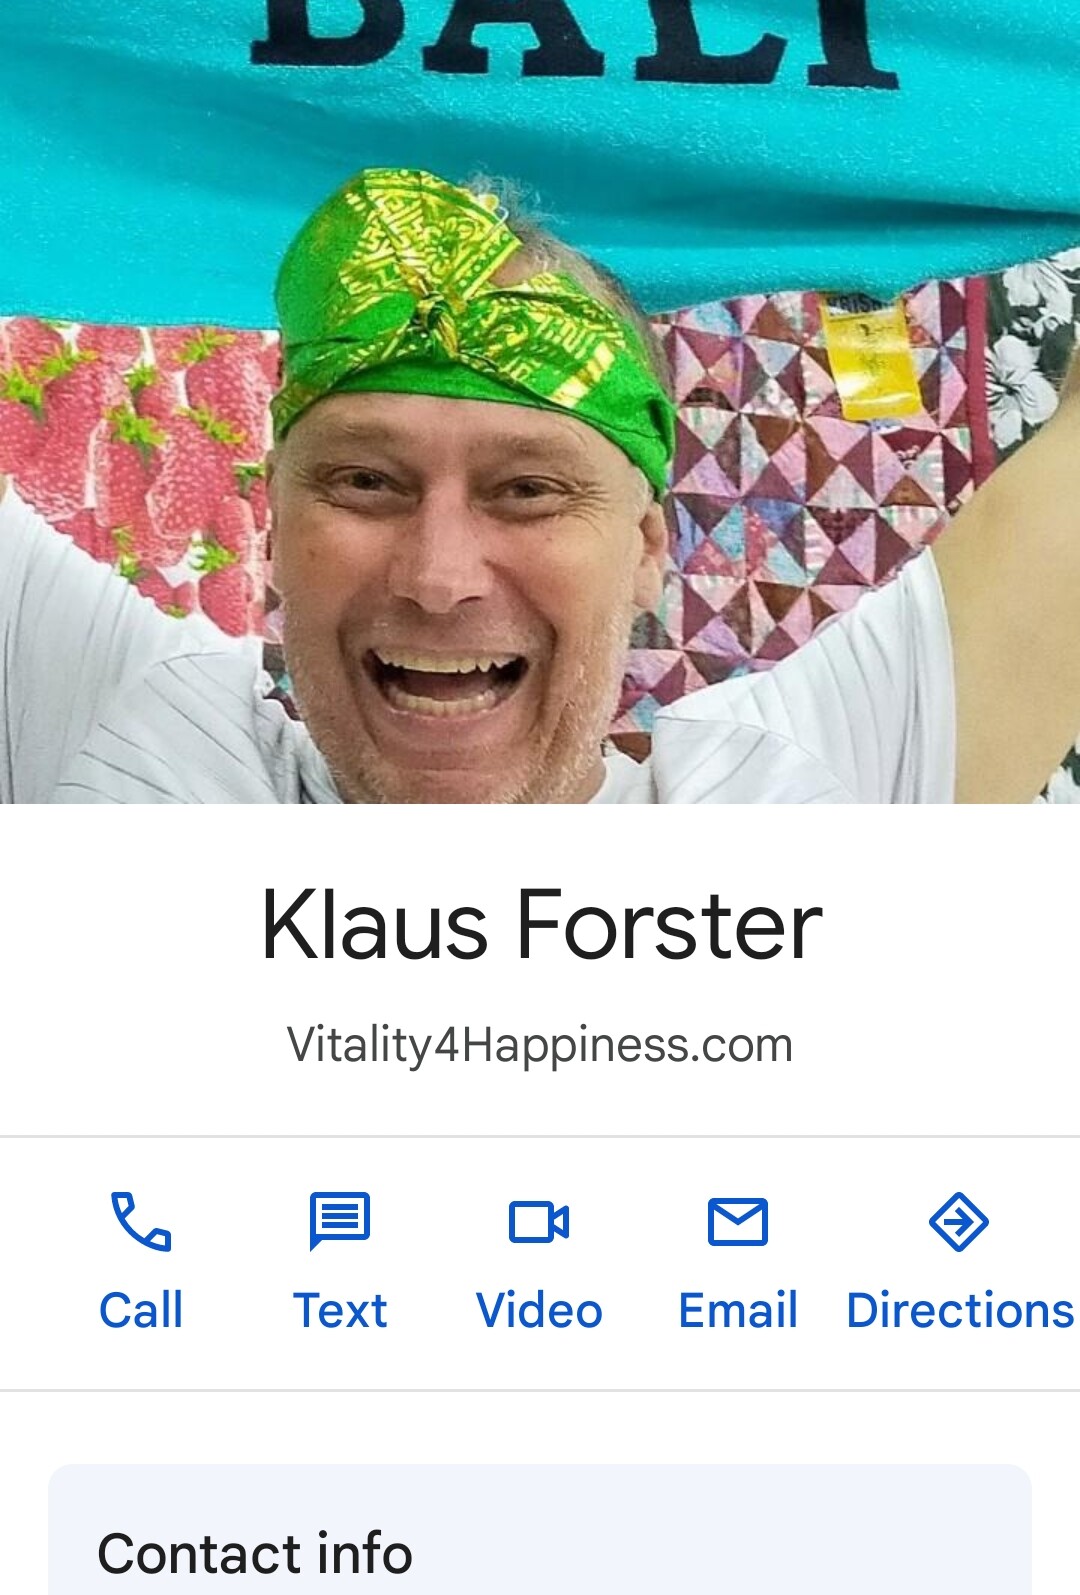 Télécharger Vcard Klaus Forster Vitality4Happiness